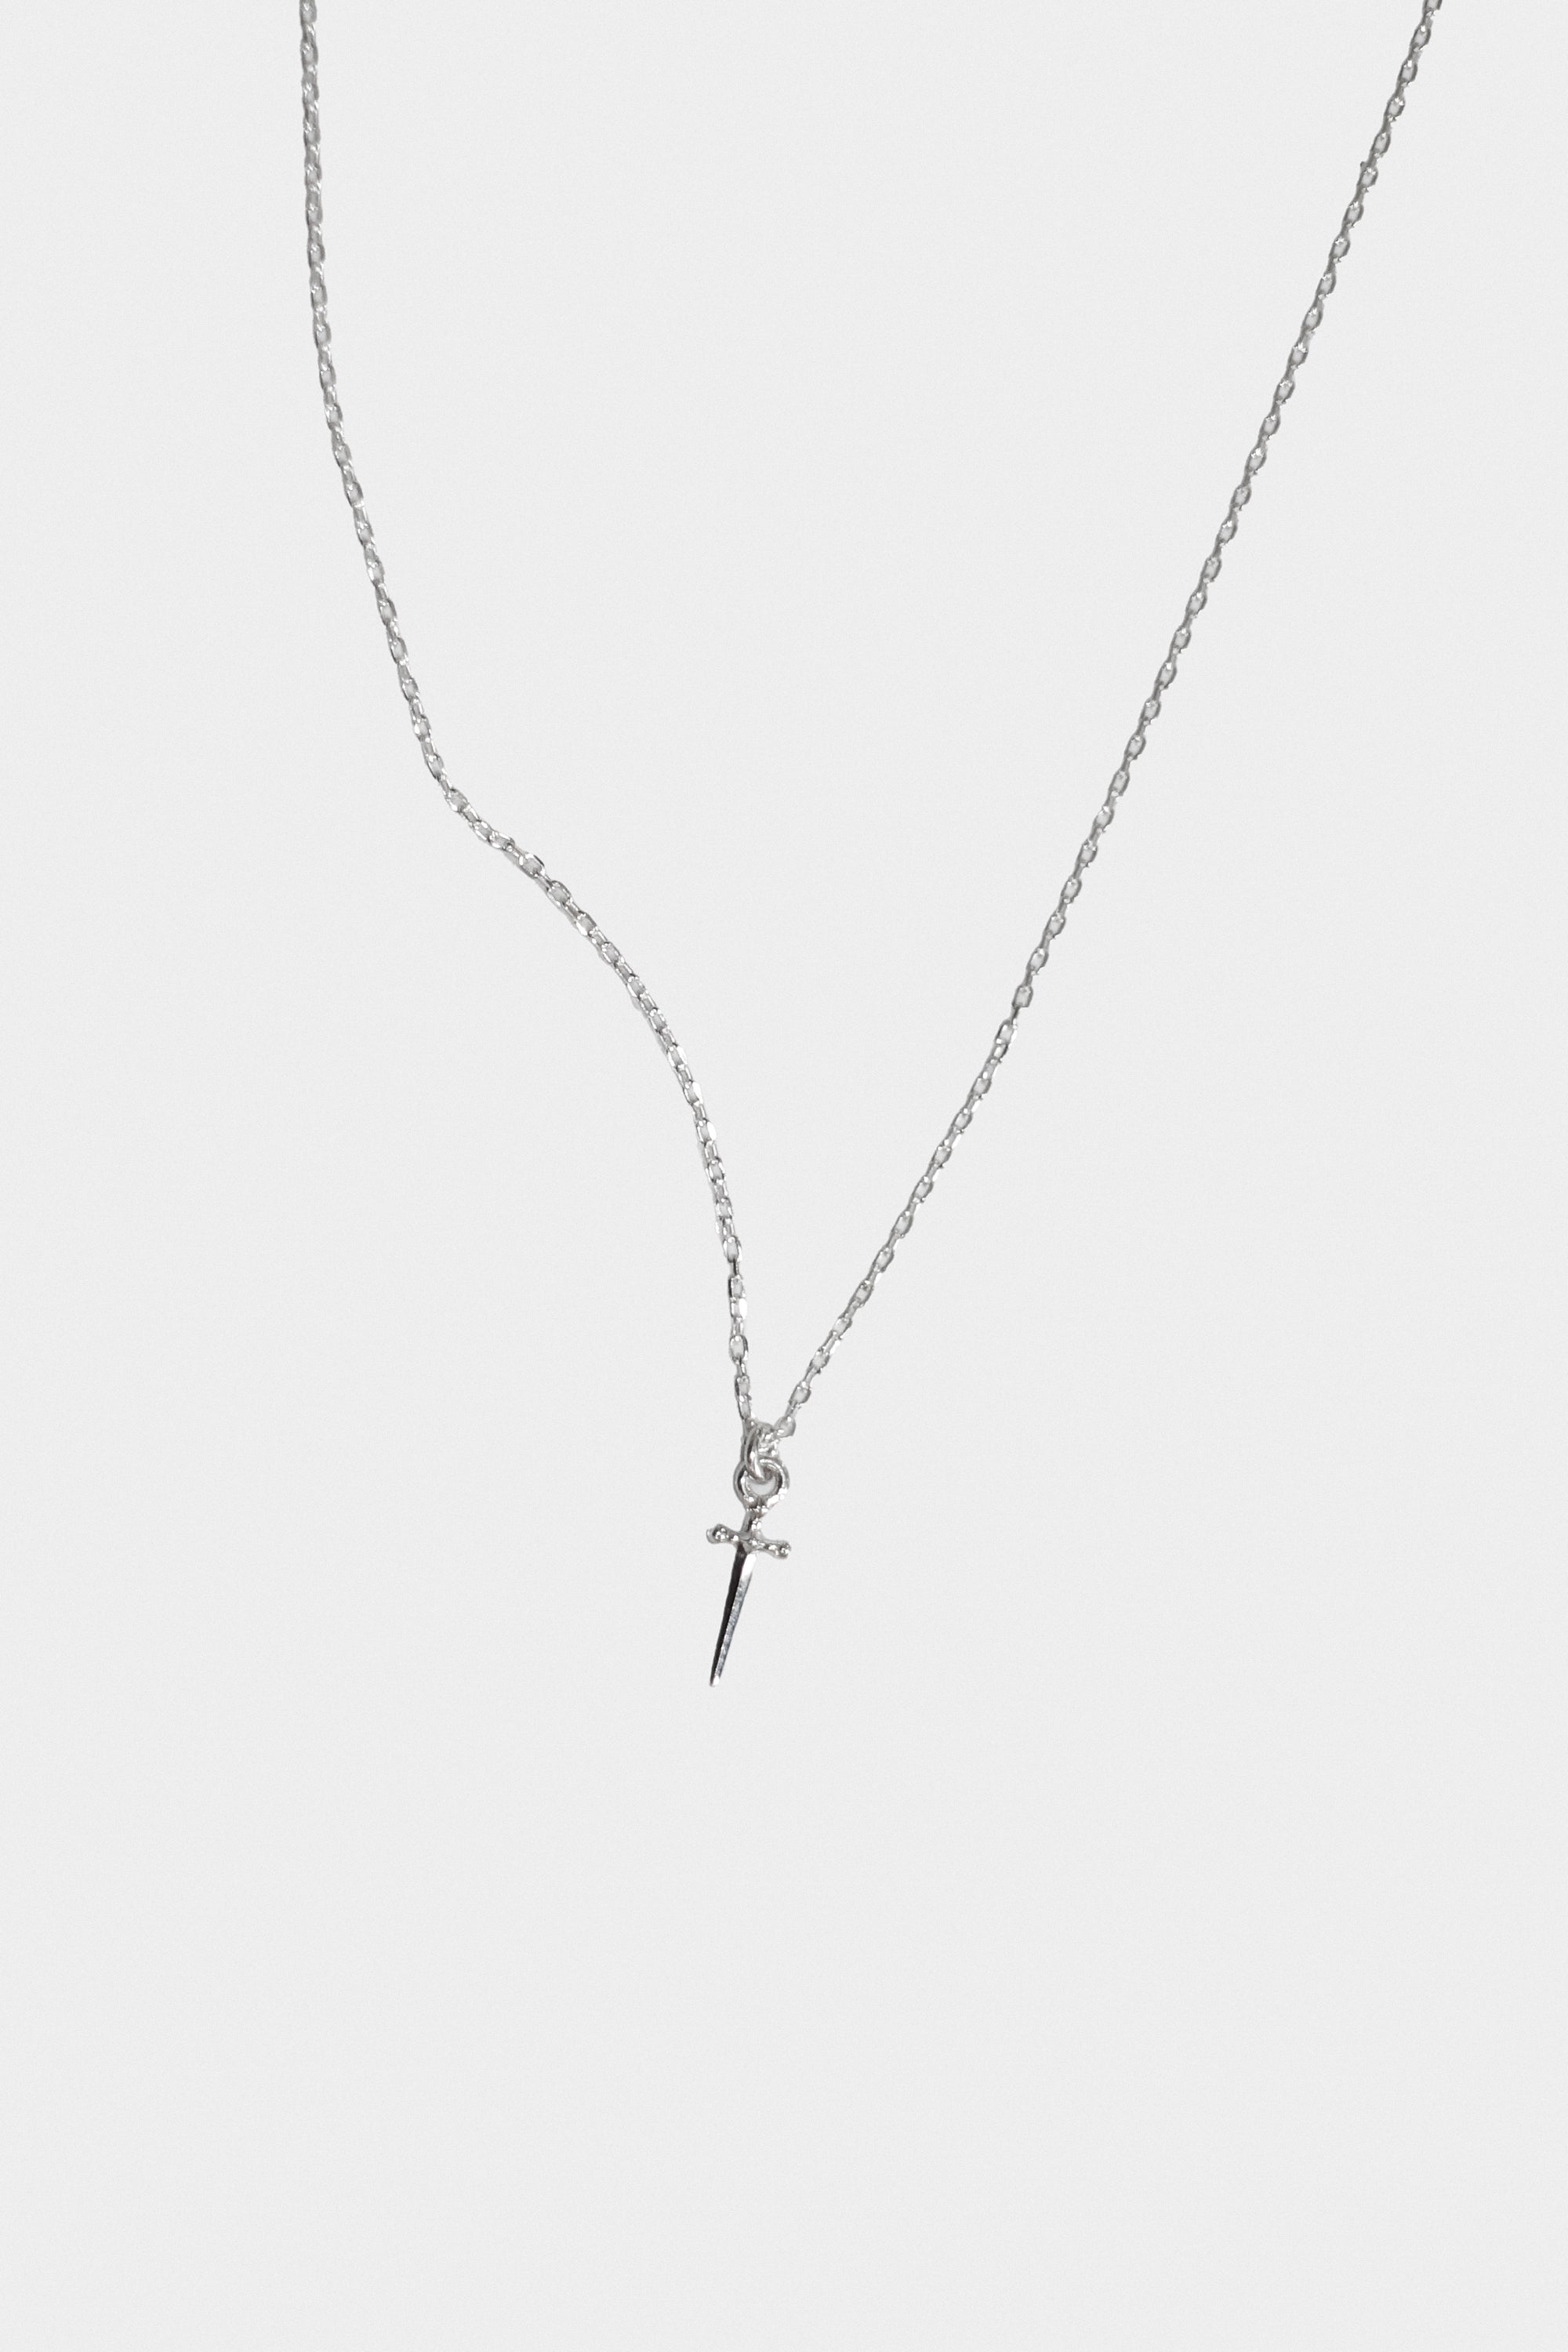 Itty Bitty Sword Pendant Necklace in Sterling Silver